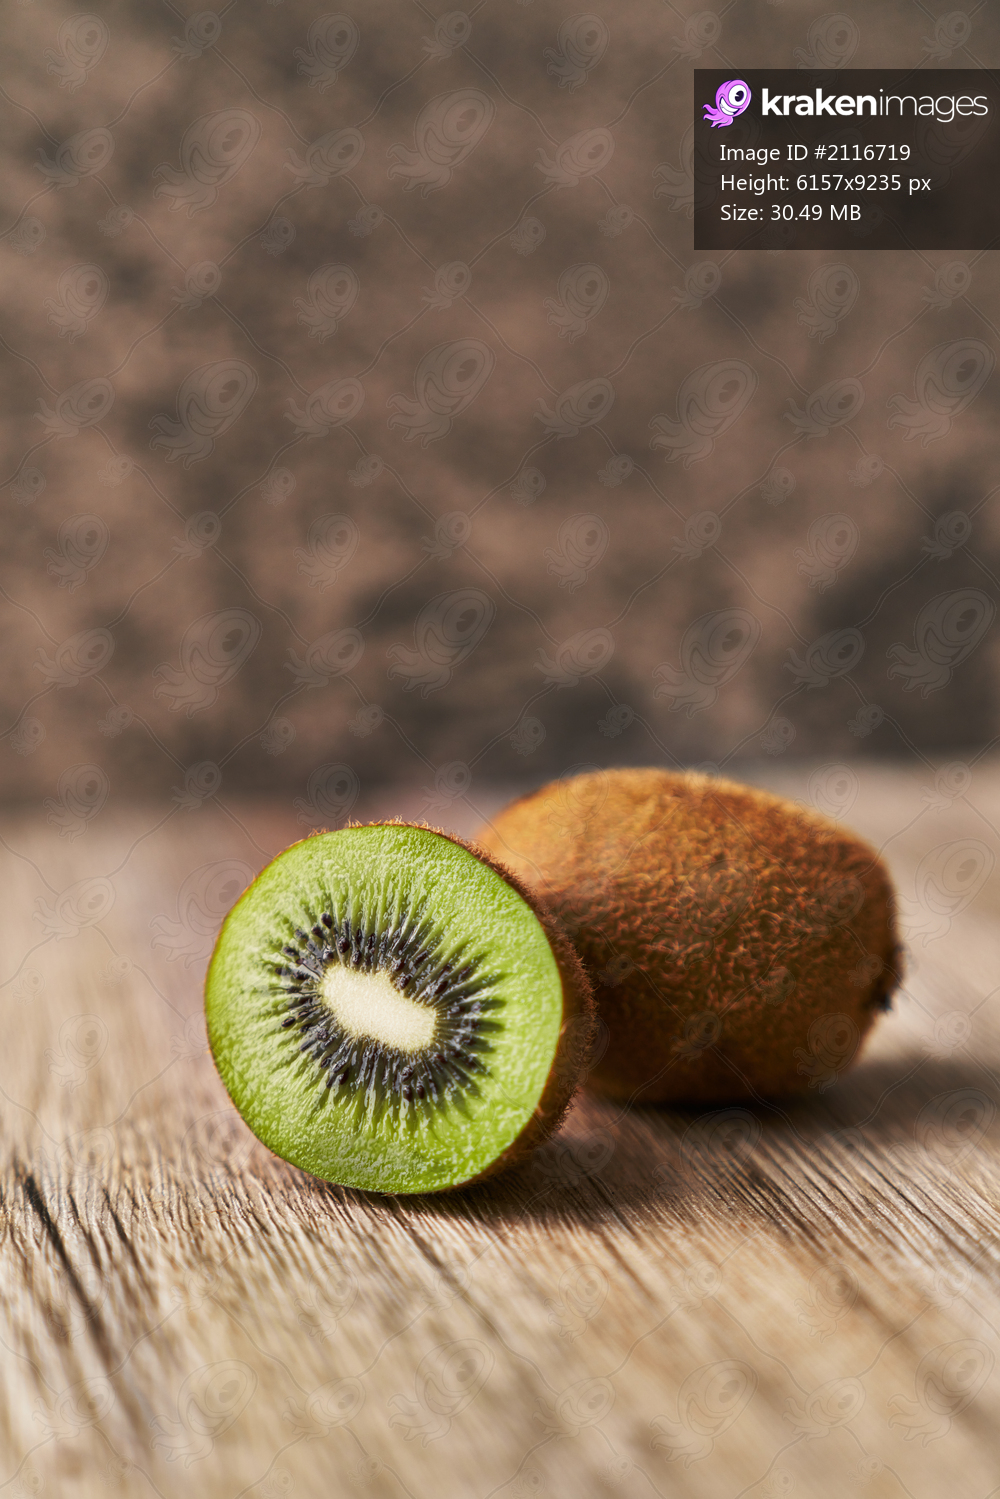  Single kiwi and slice on a wooden table